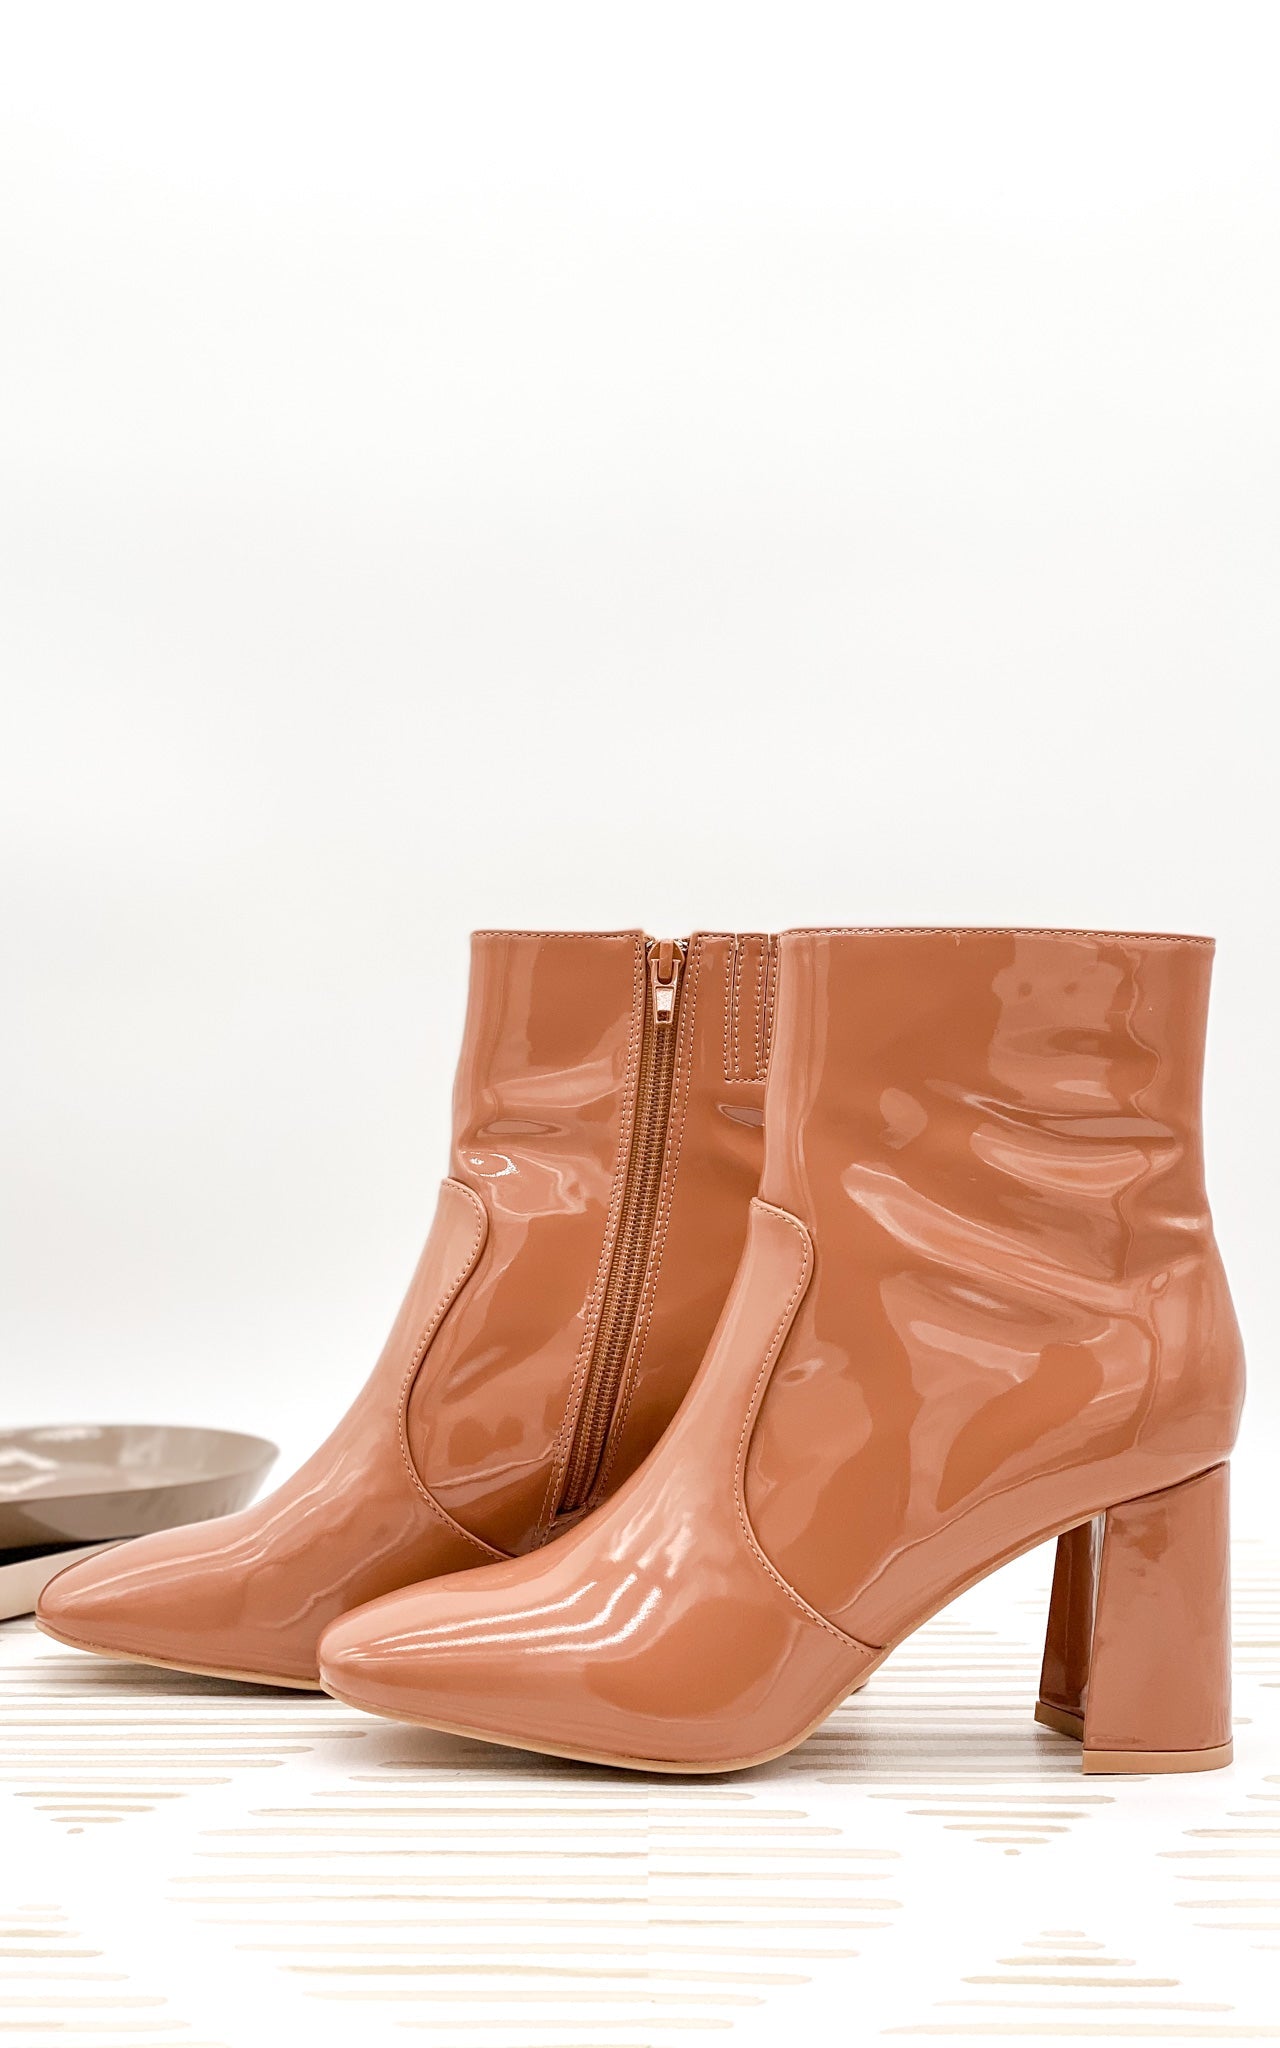 Beast Ketsby Heeled Ankle Boot in Nude